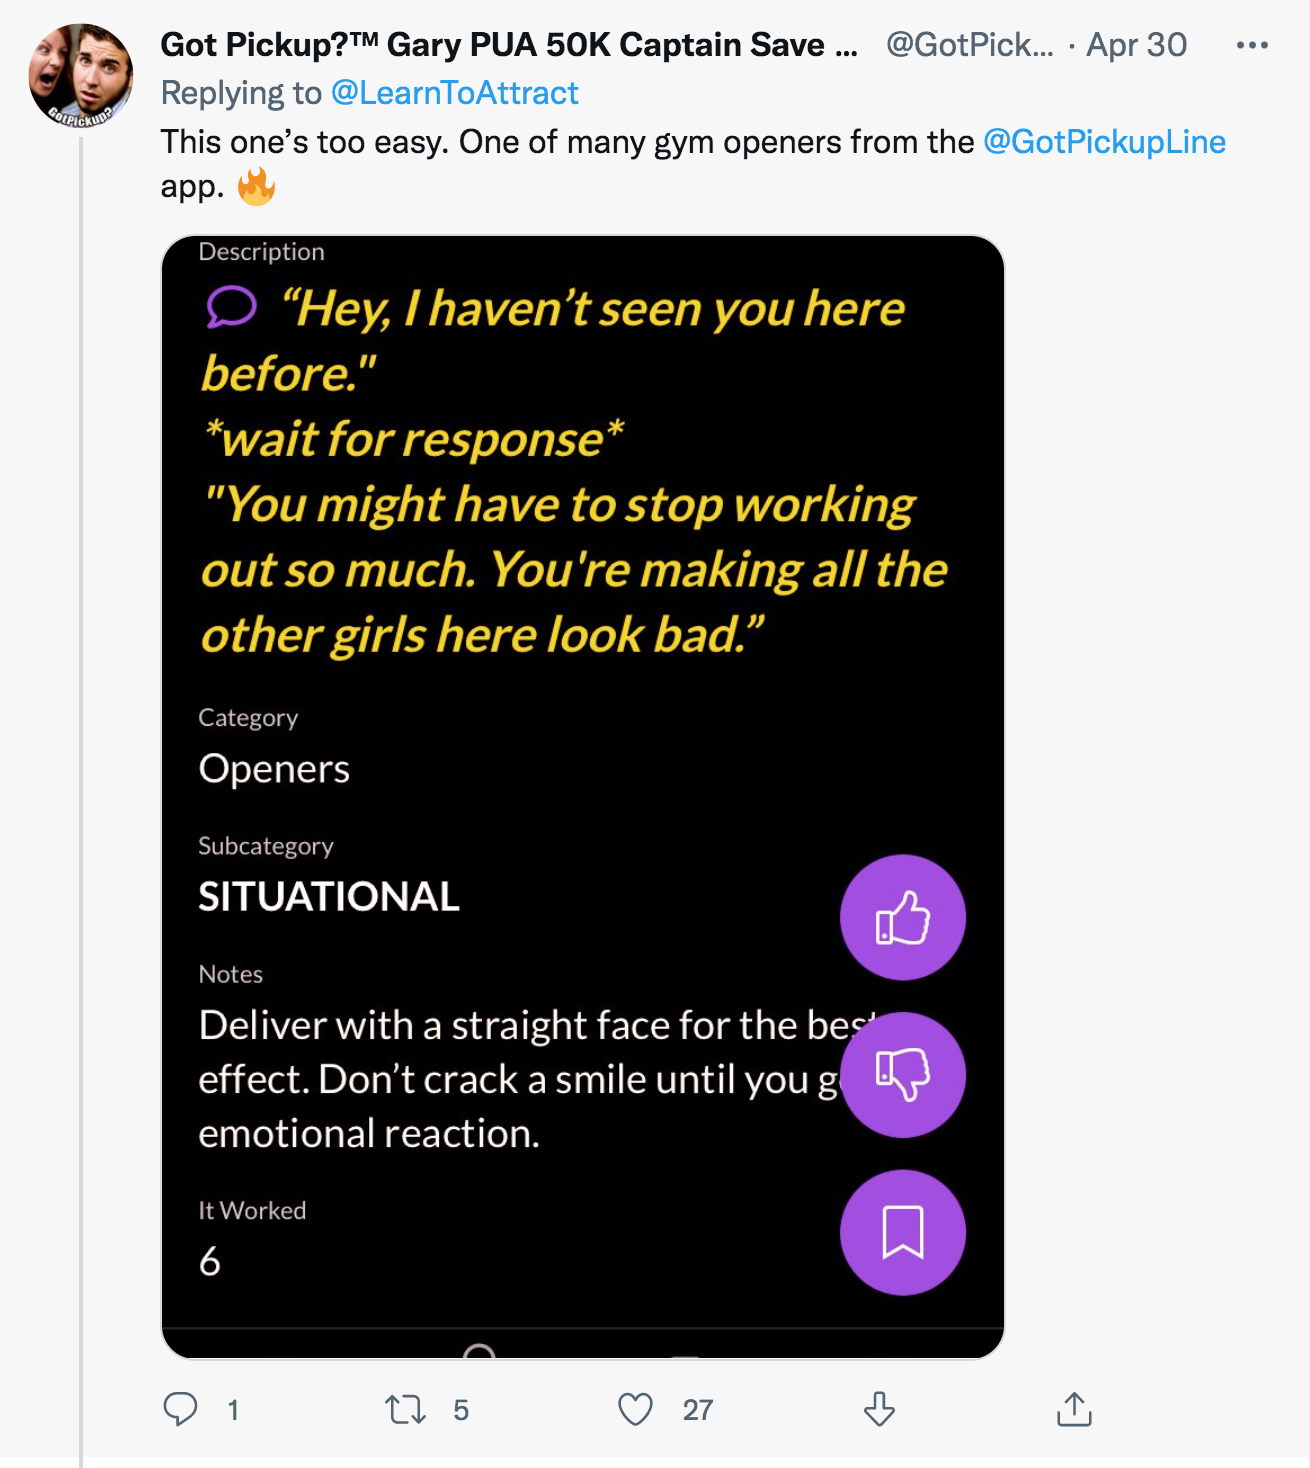 screenshot - . Got Pickup? Gary Pua 50K Captain Save ... ... Apr 30 This one's too easy. One of many gym openers from the app. Description "Hey, I haven't seen you here before." wait for response "You might have to stop working out so much. You're making 